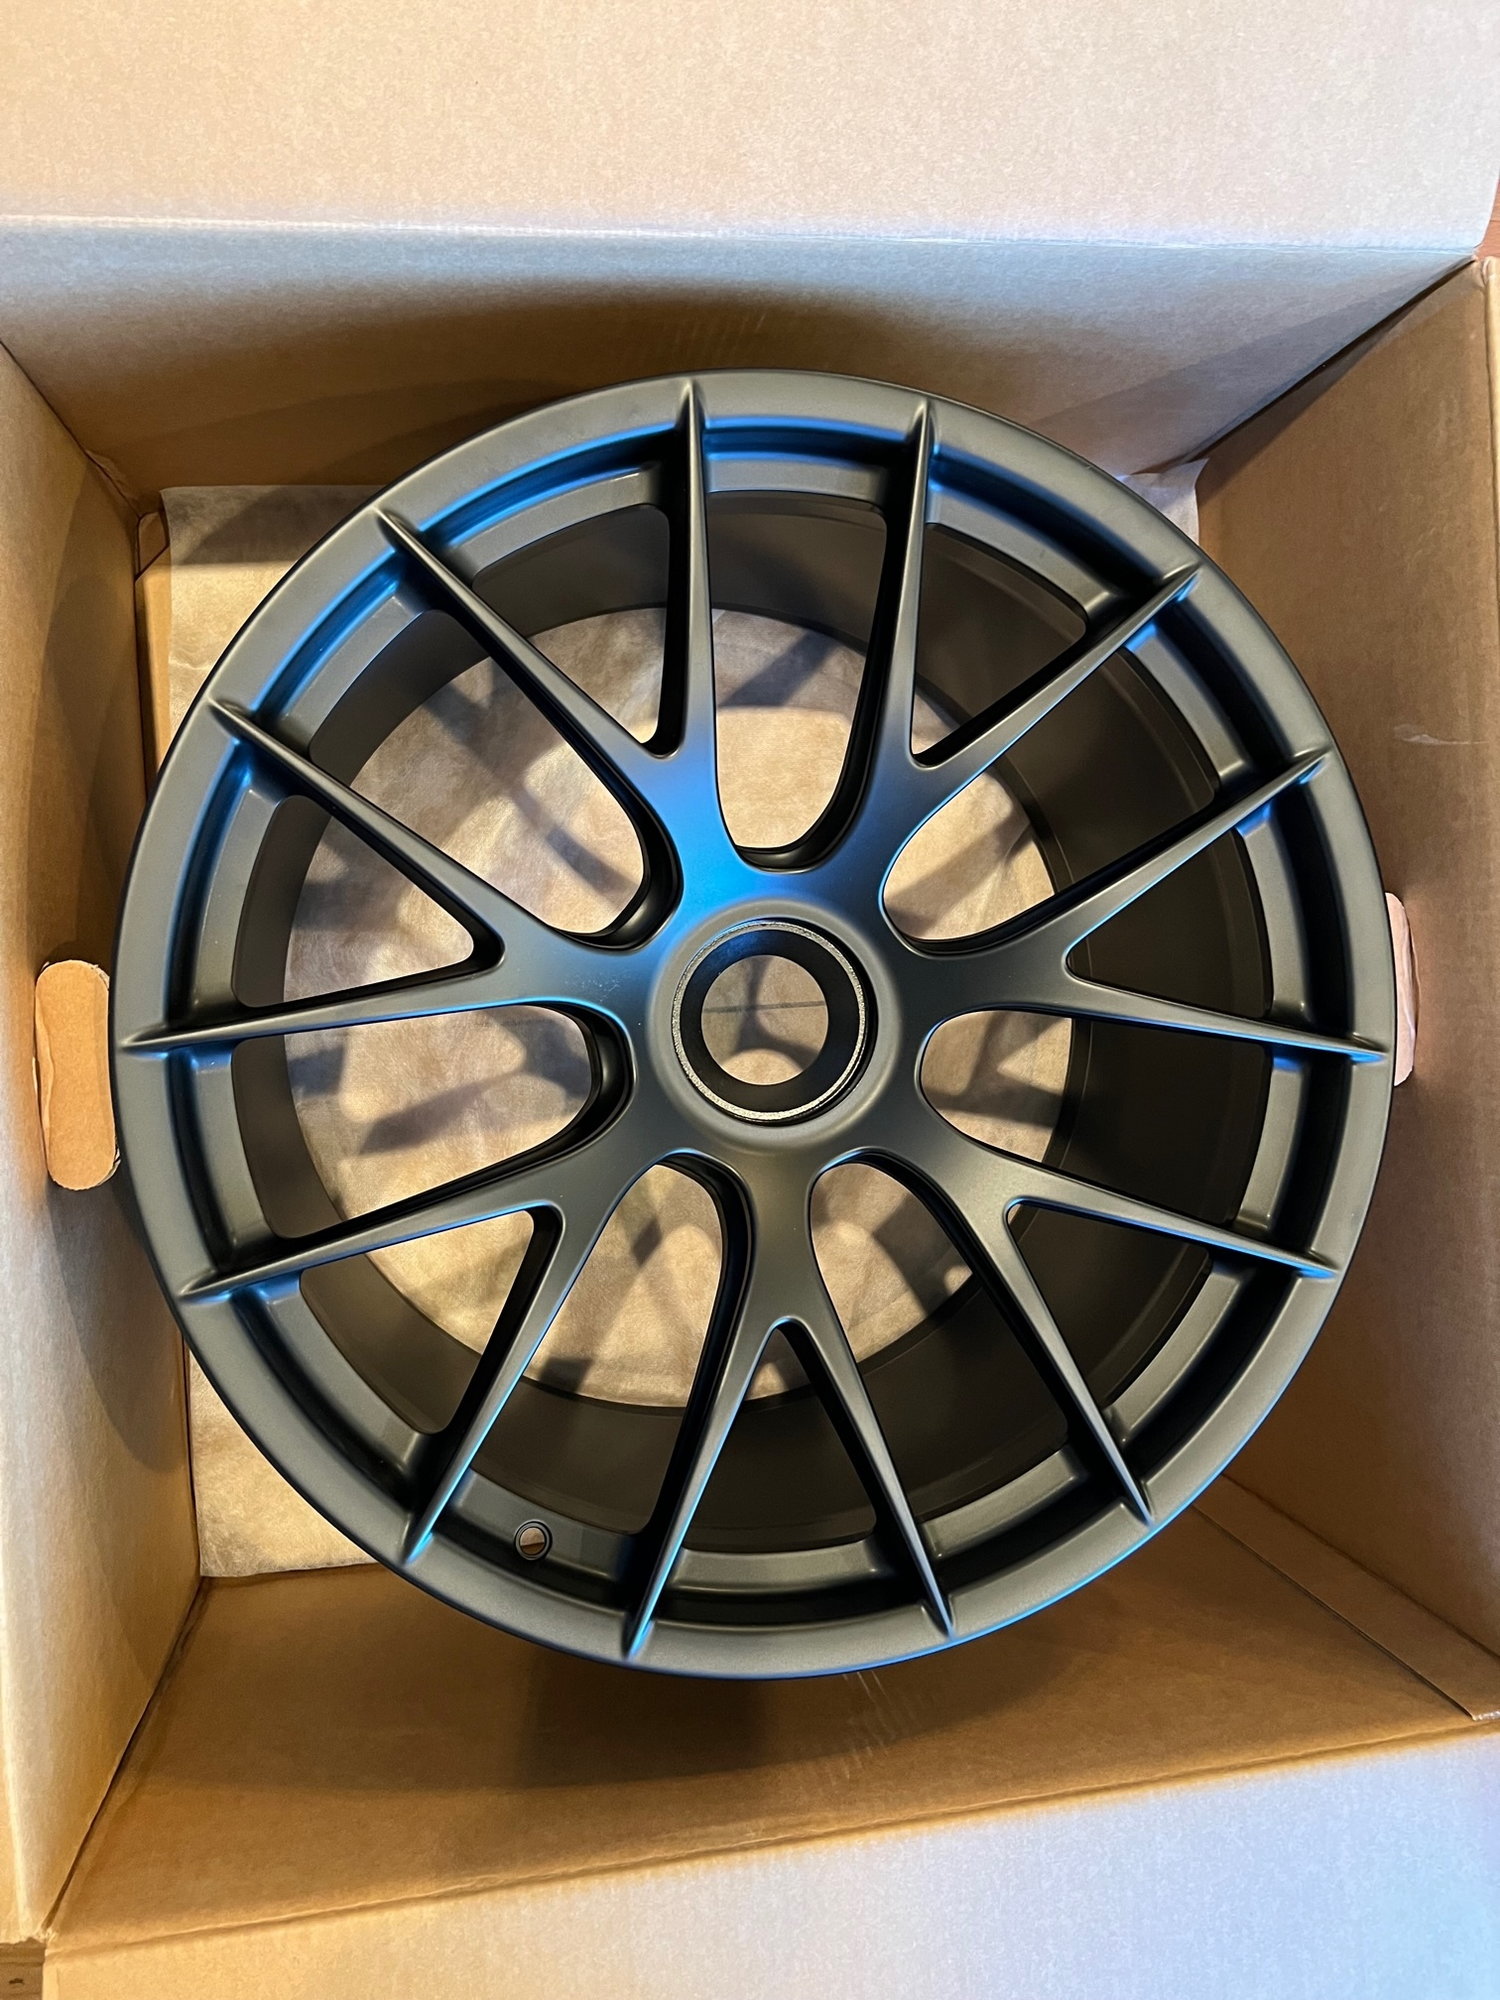 Wheels and Tires/Axles - 20"/21" Staggered Magnesium Wheels for 991 GT3RS & G2RS Weissach Satin Black RE 1746 - New - Short Hills, NJ 7041, United States